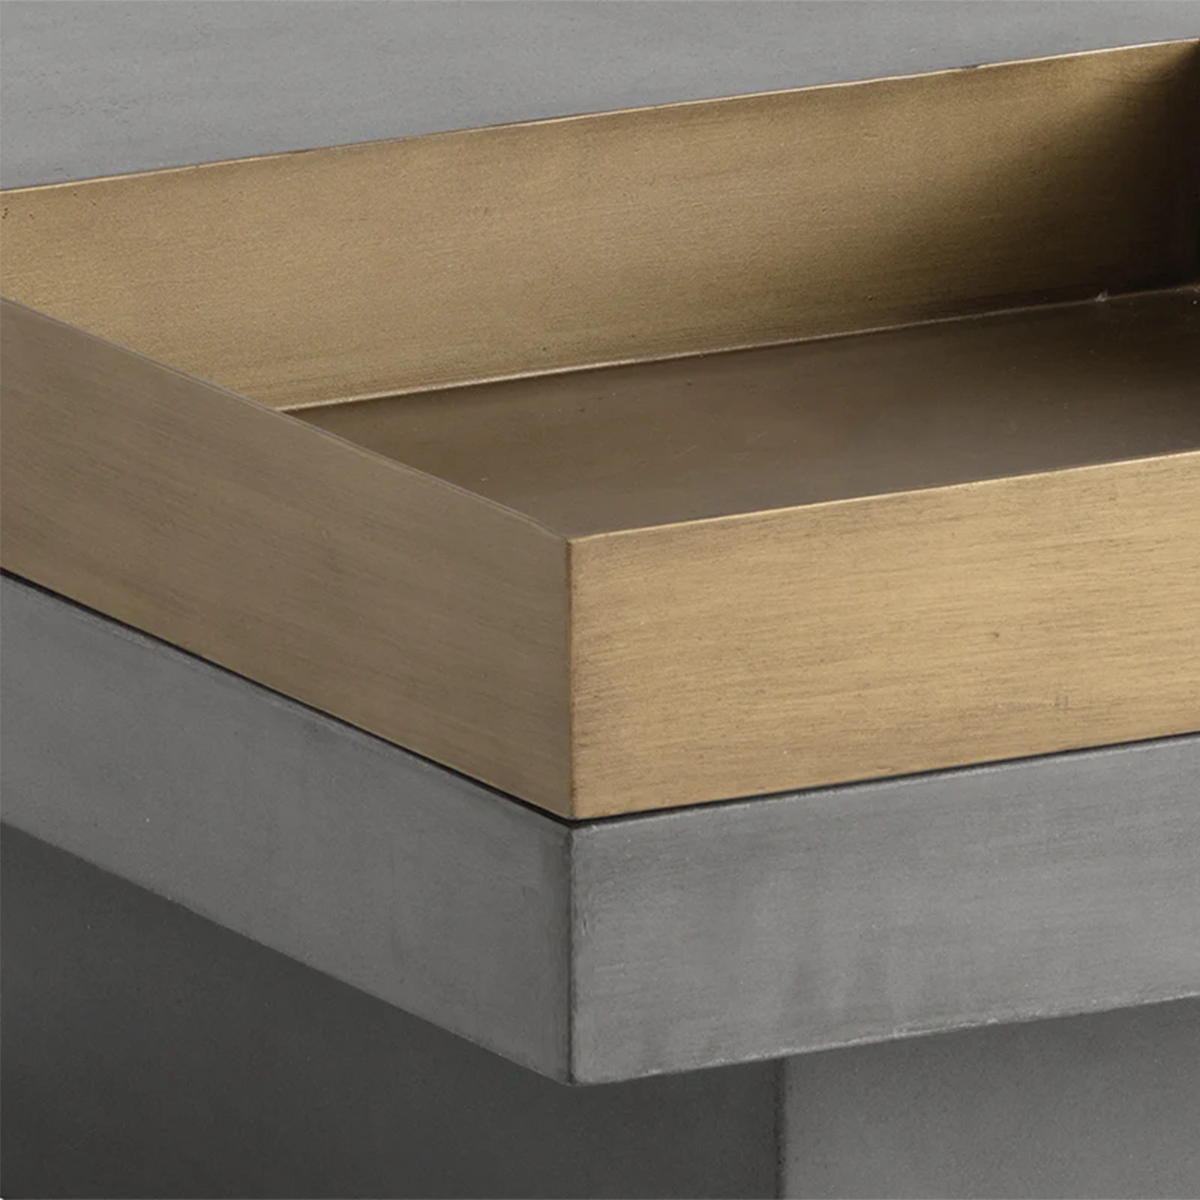 Quill Square Coffee Table by Sunpan Square Close Image of the Material